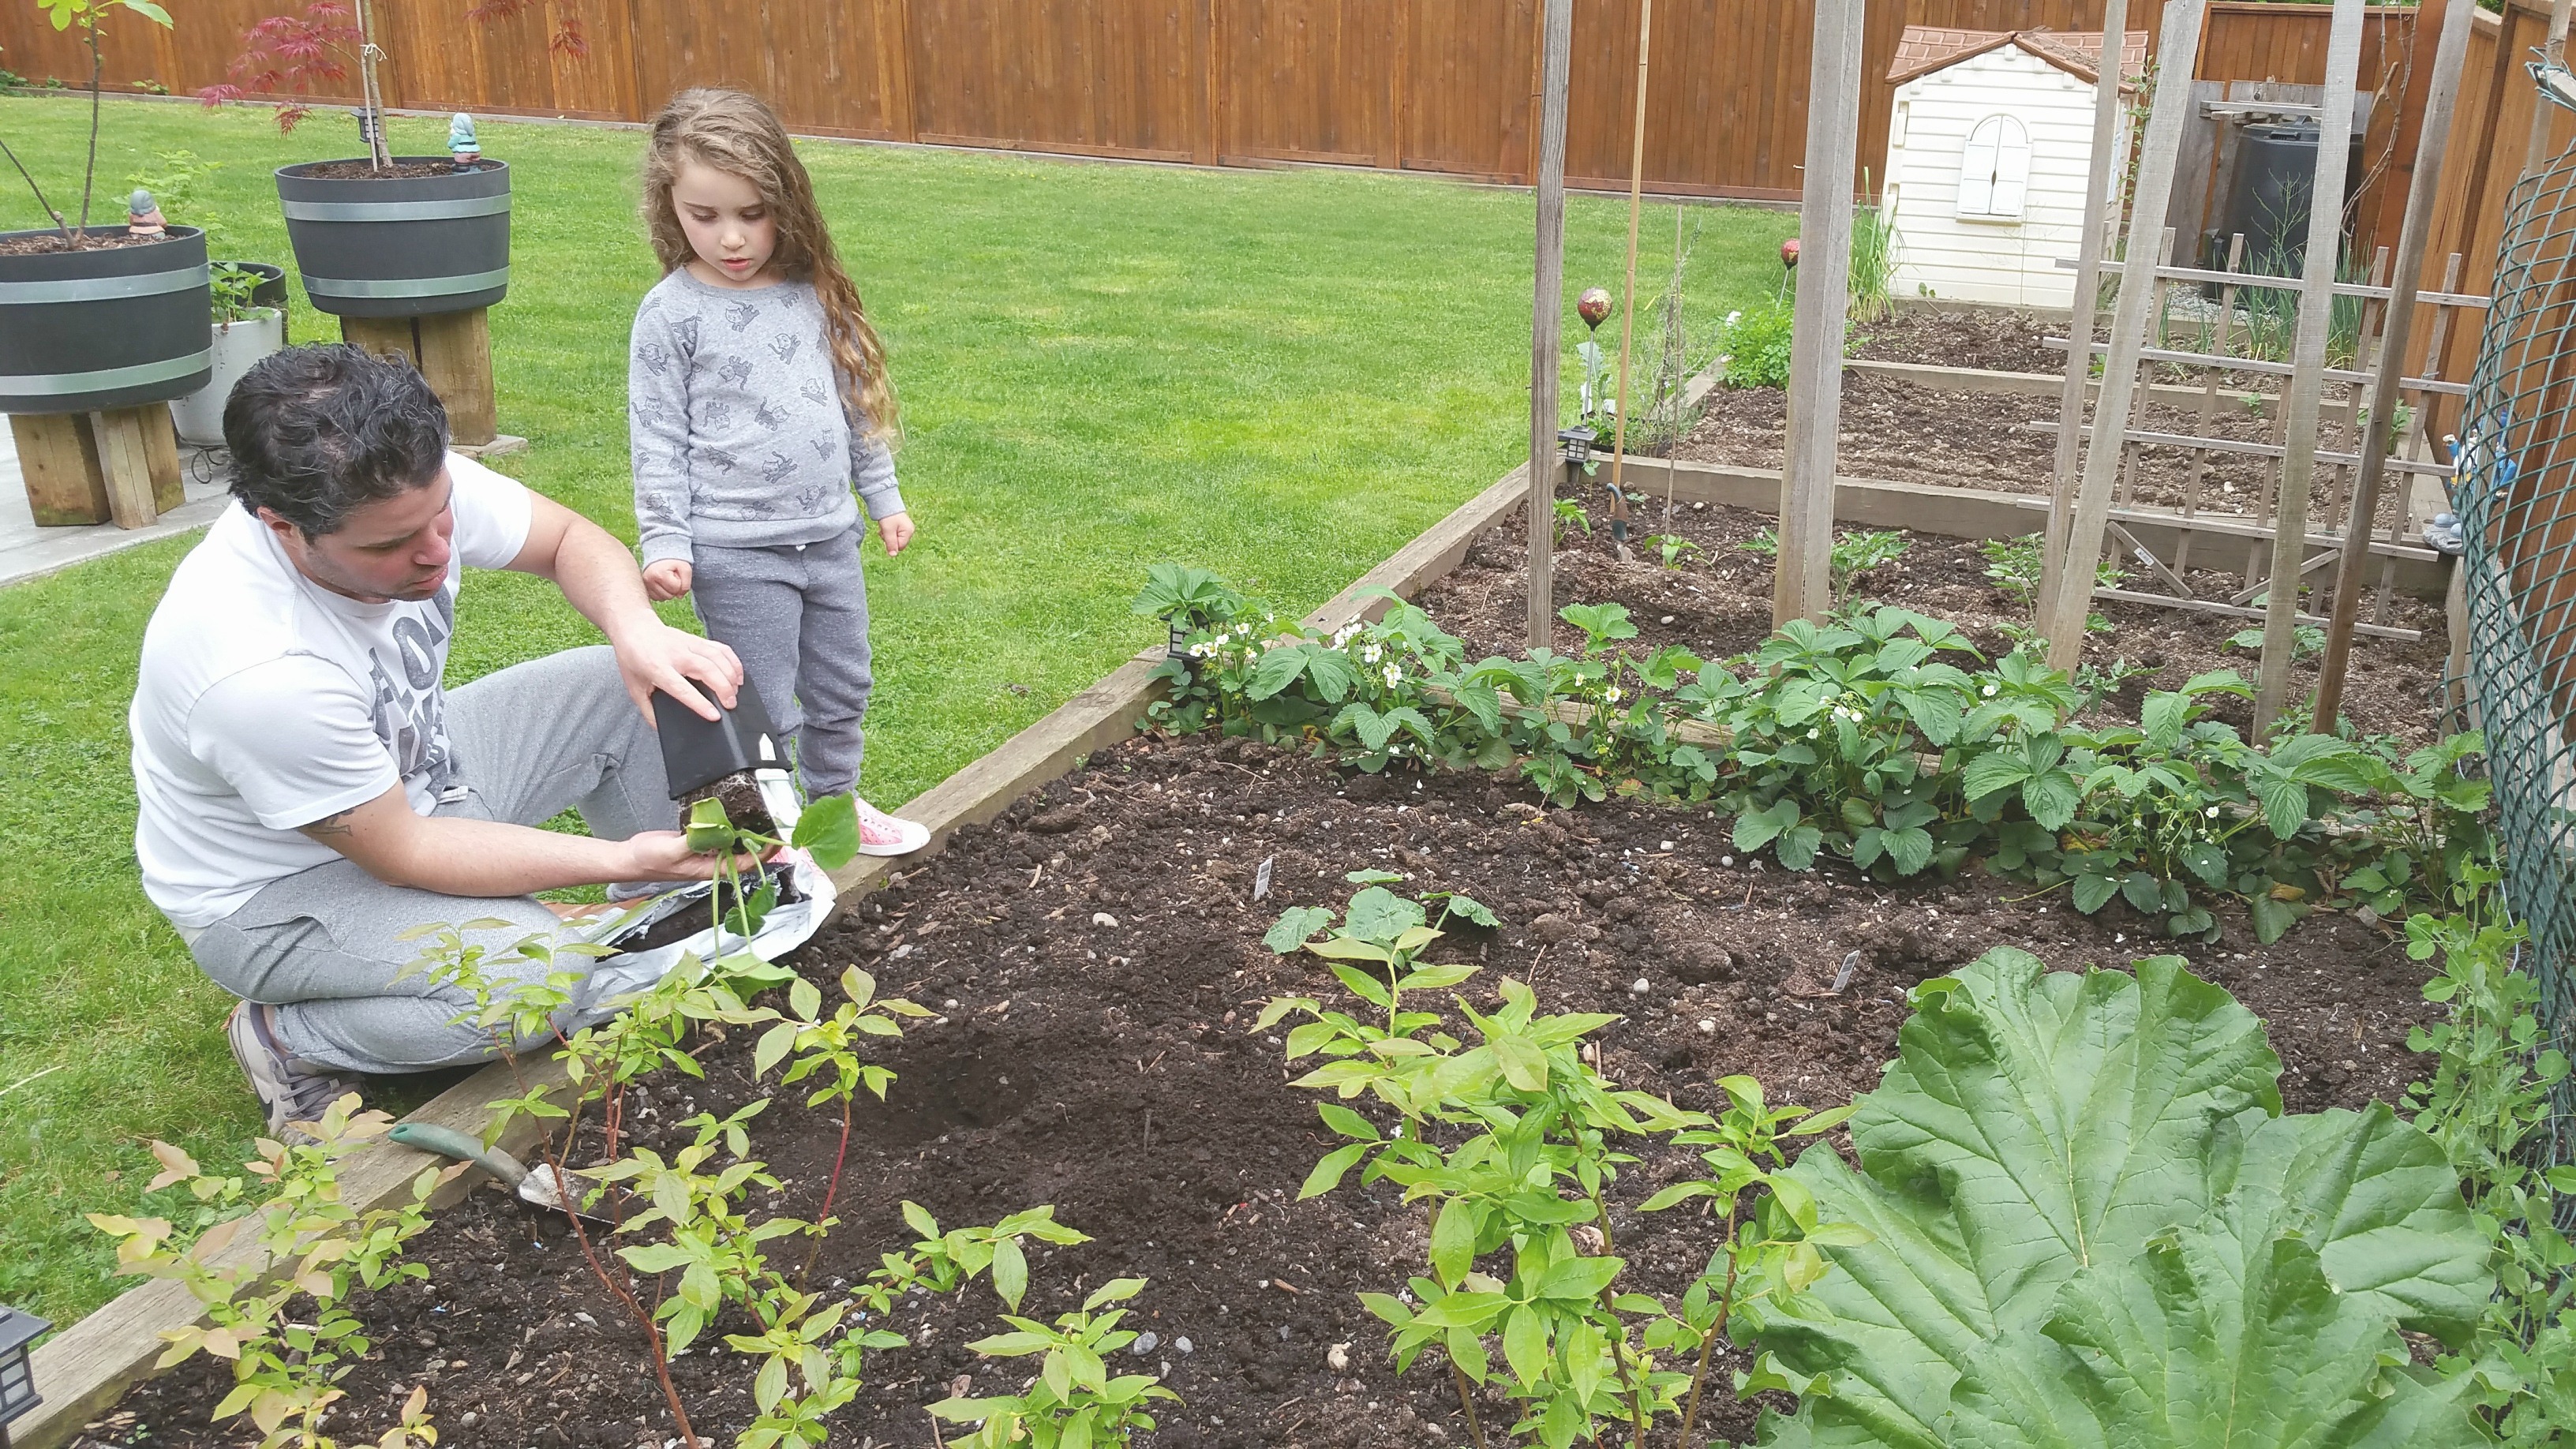 How to prepare a spring garden, including tips from someone who speaks fluent in plant. 